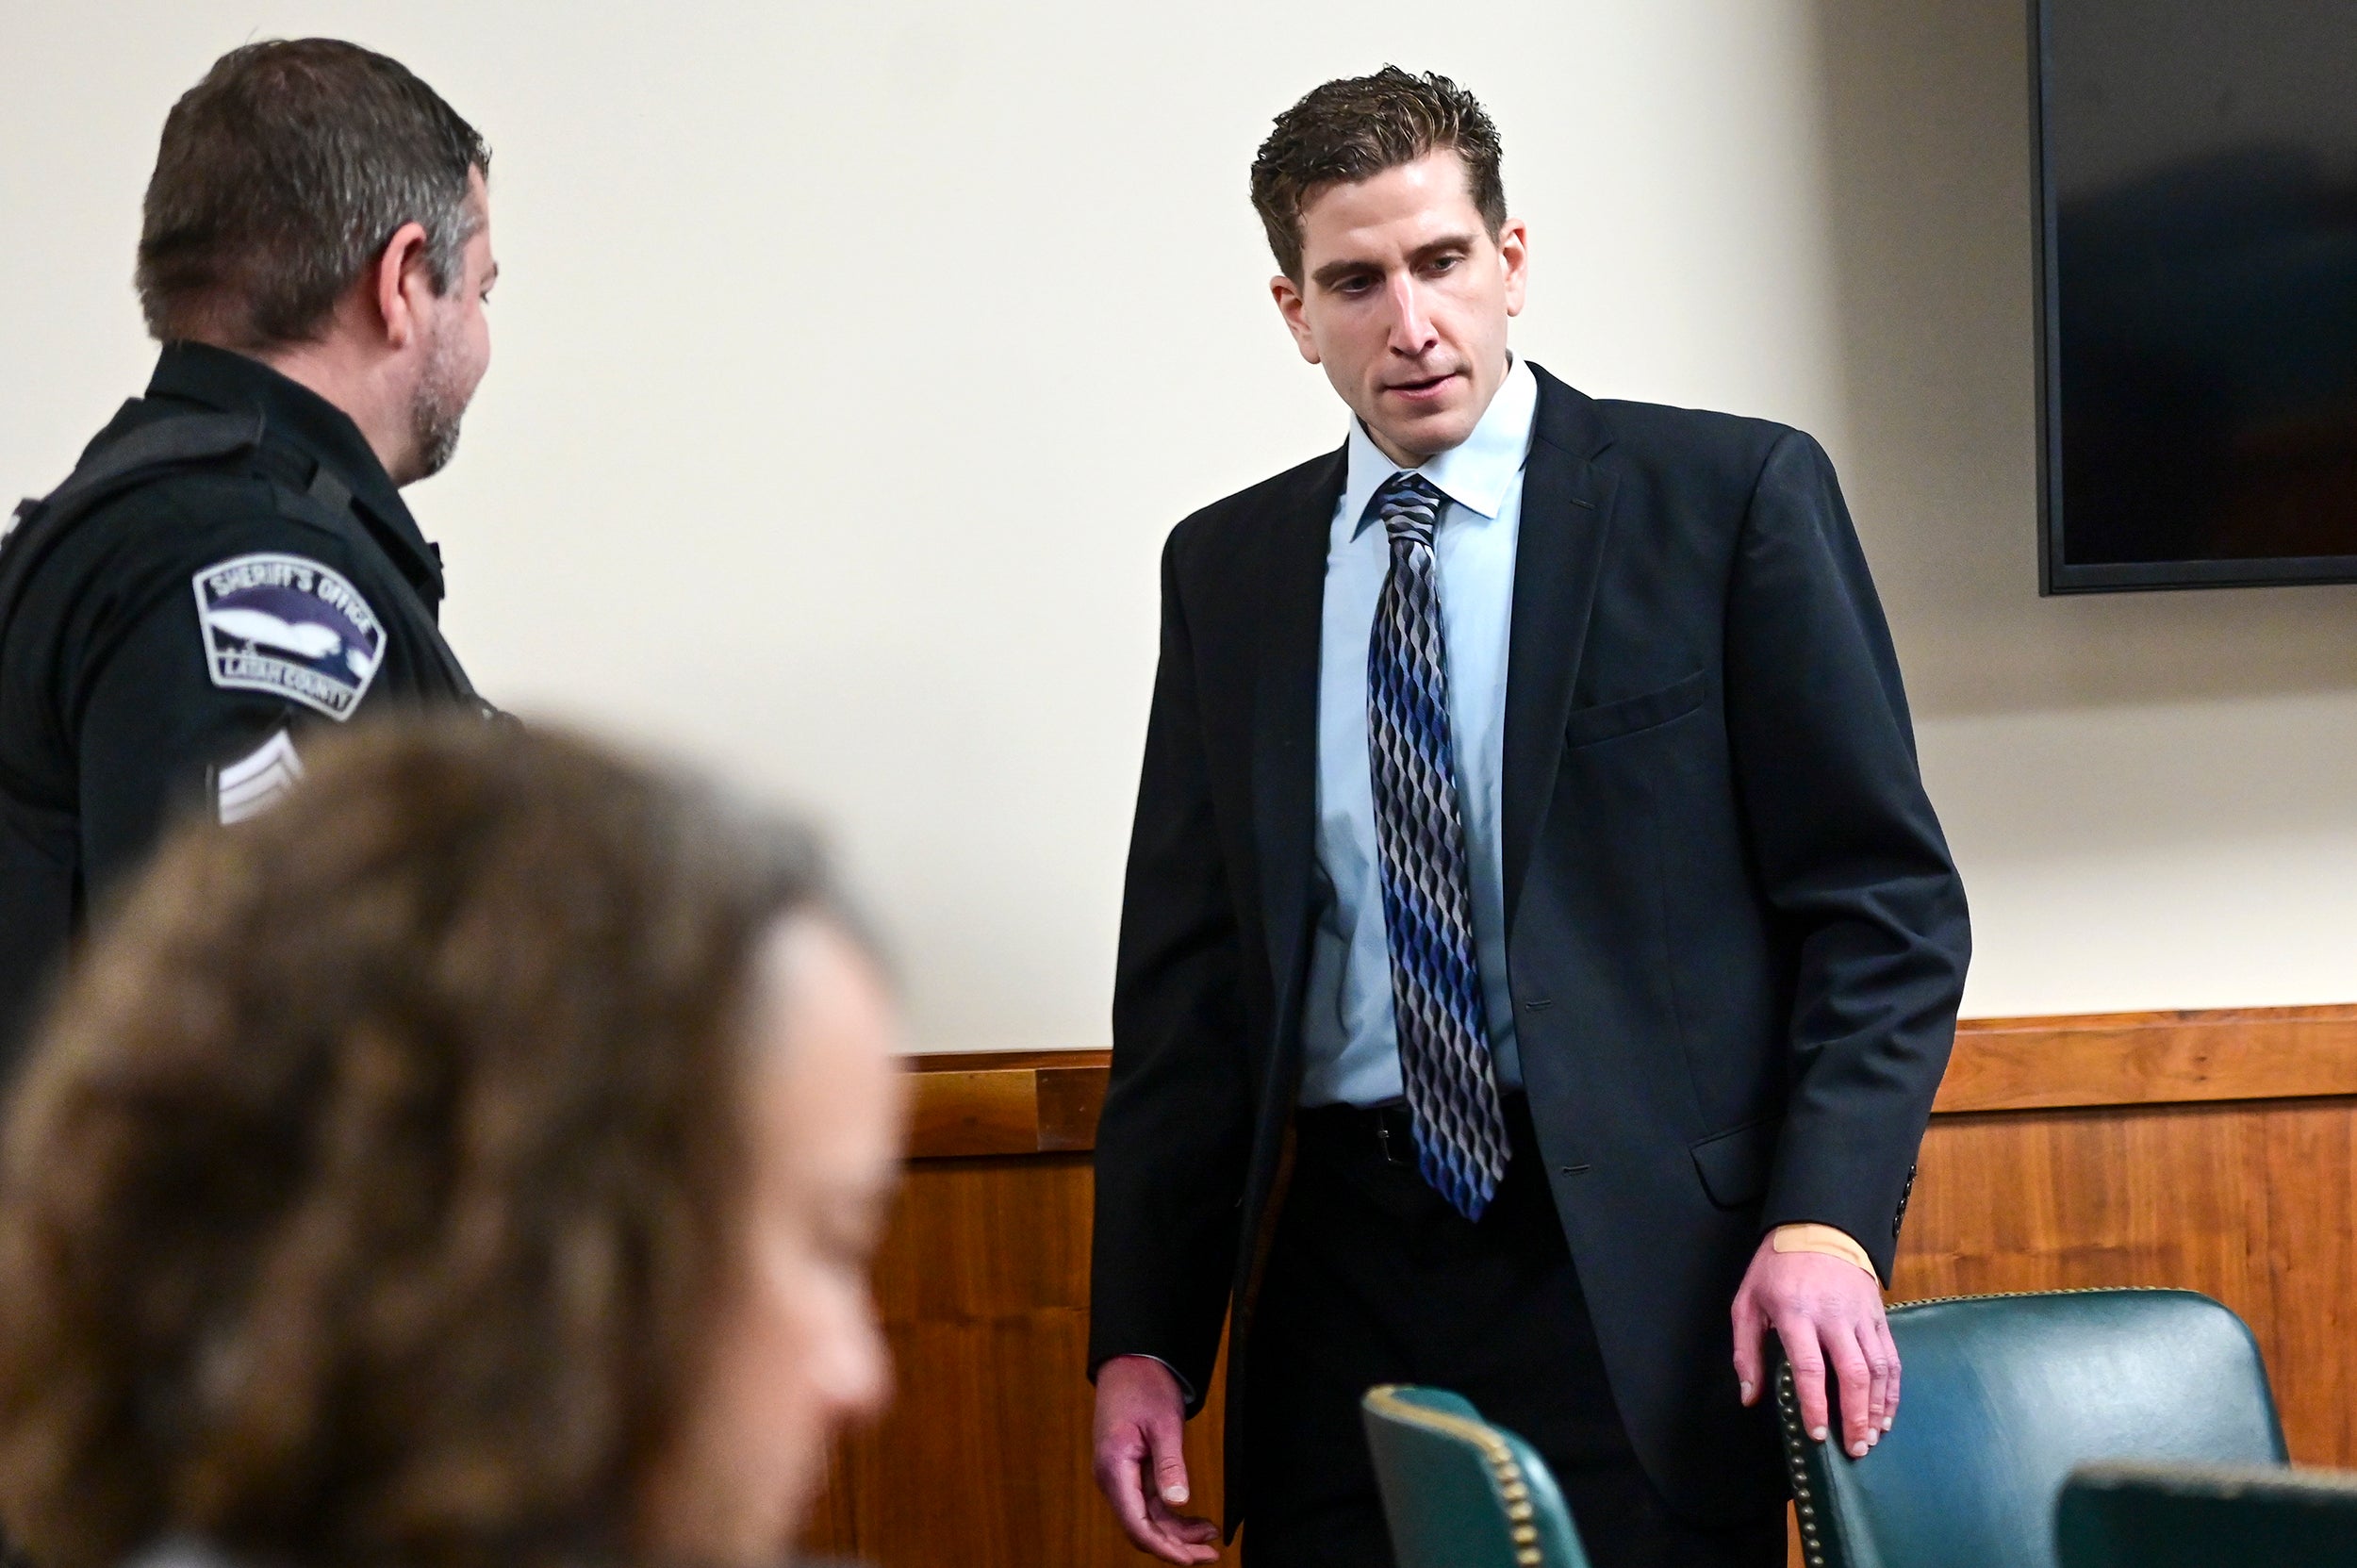 Bryan Kohberger enters the courtroom for a motion hearing regarding a gag order, Friday, June 9, 2023, in Moscow, Idaho